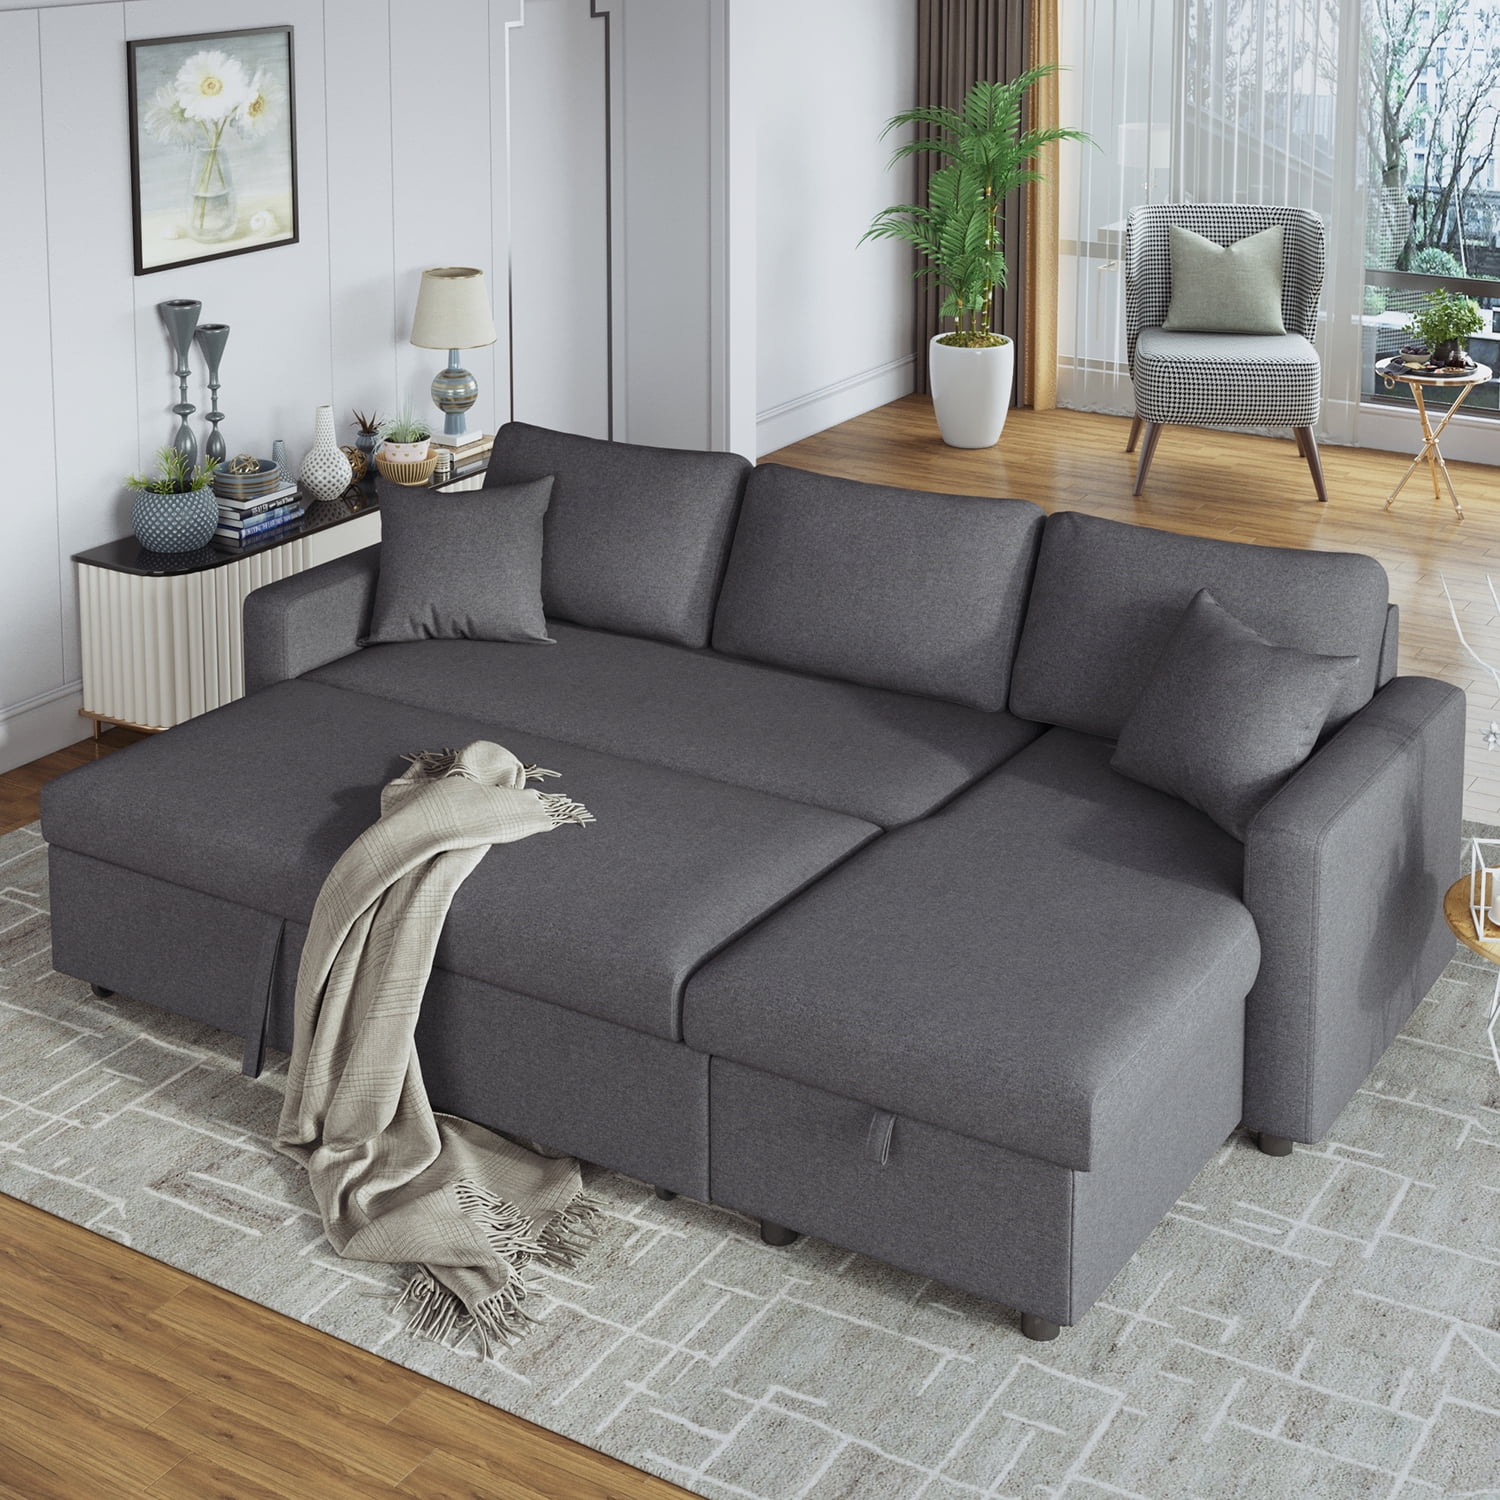 Churanty Upholstery Sleeper Sectional Sofa Pull Out Bed With Storage Chaise Gray Com